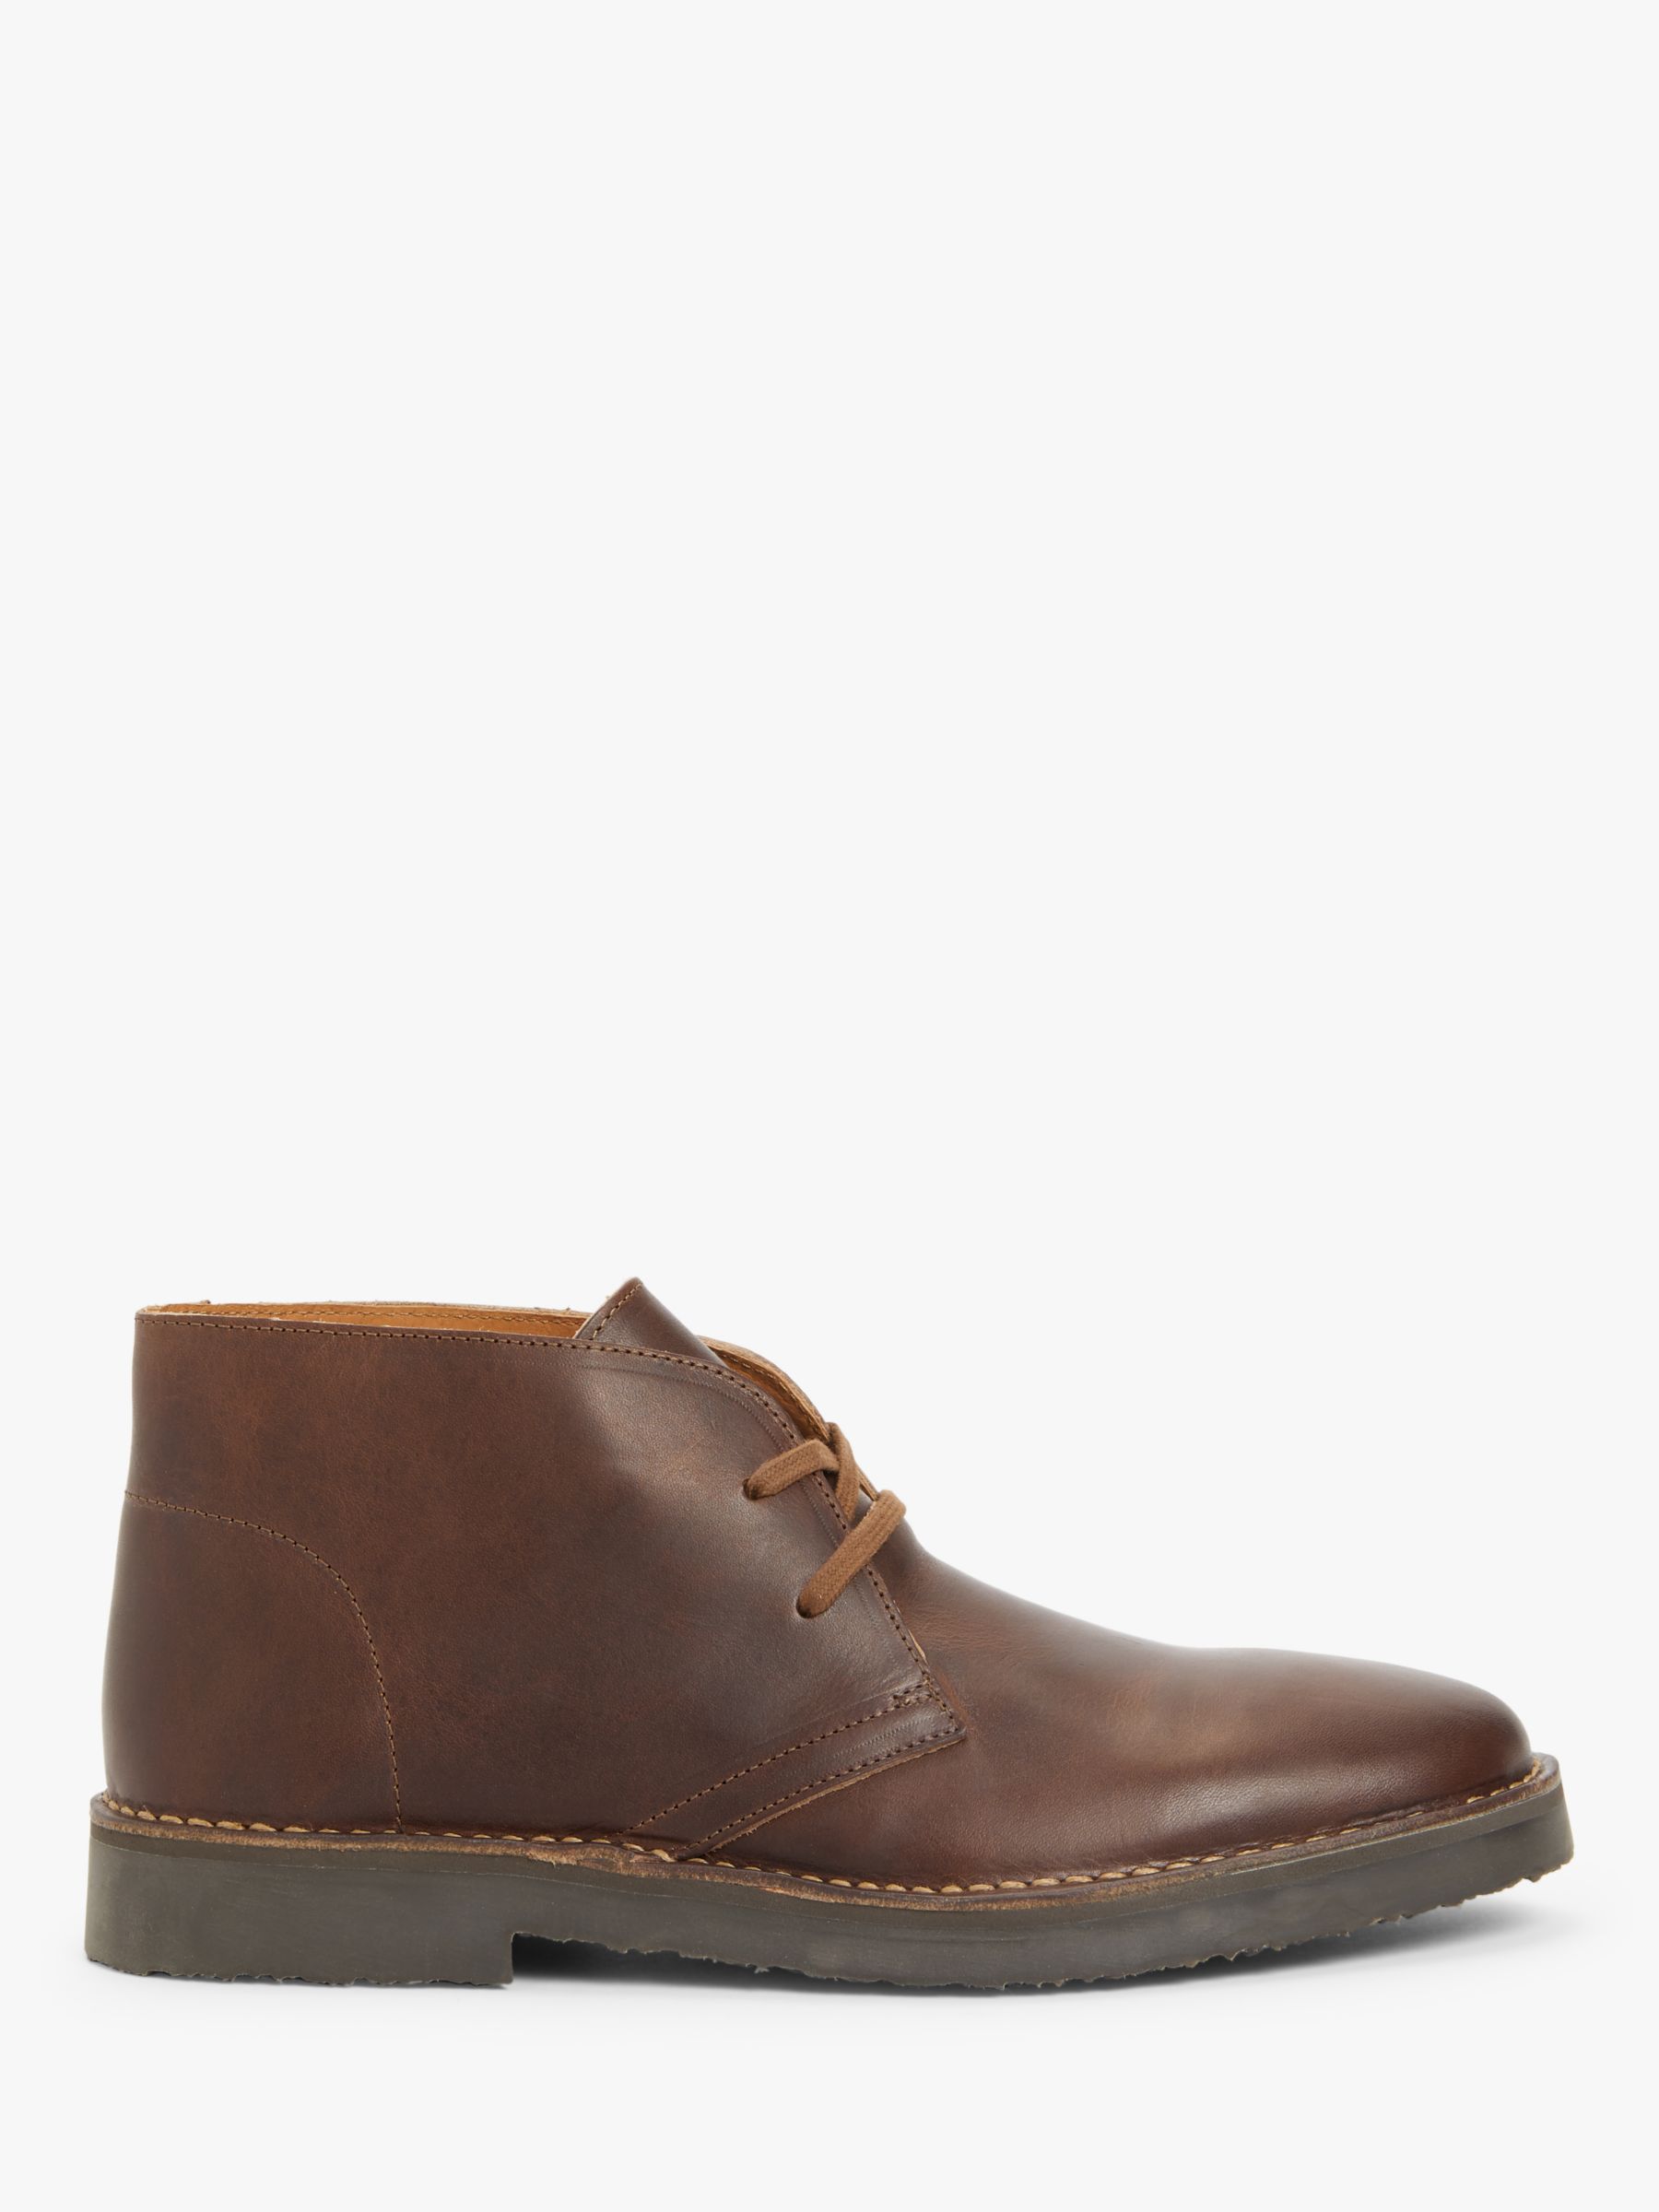 John Lewis & Partners Fiennes Leather Desert Boots, Brown at John Lewis ...